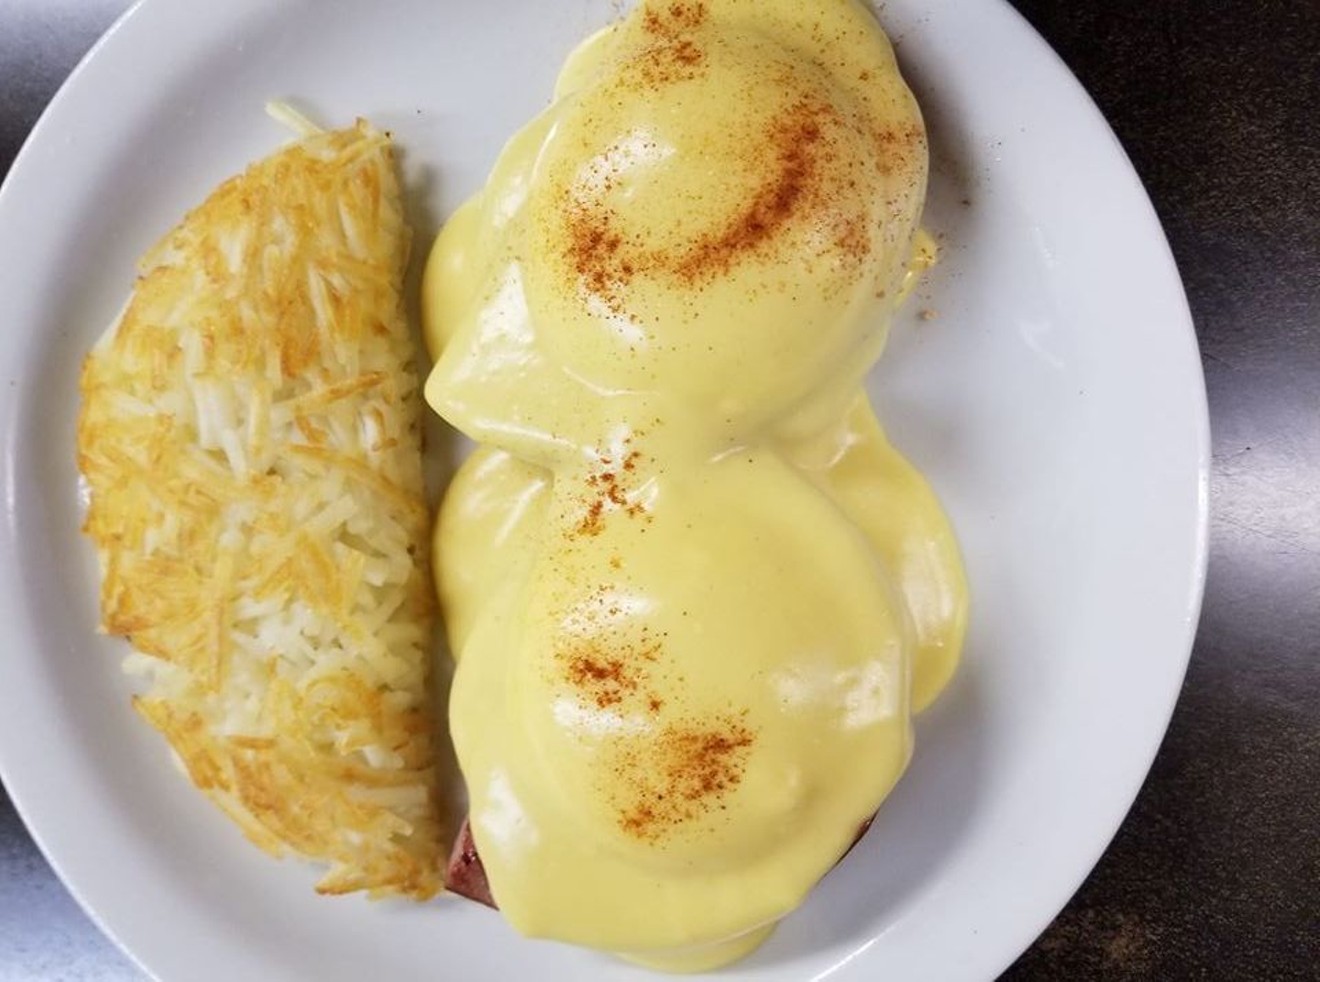 Nug Nugs Diner is new, but you'll recognize the eggs Benedict and hashbrowns.